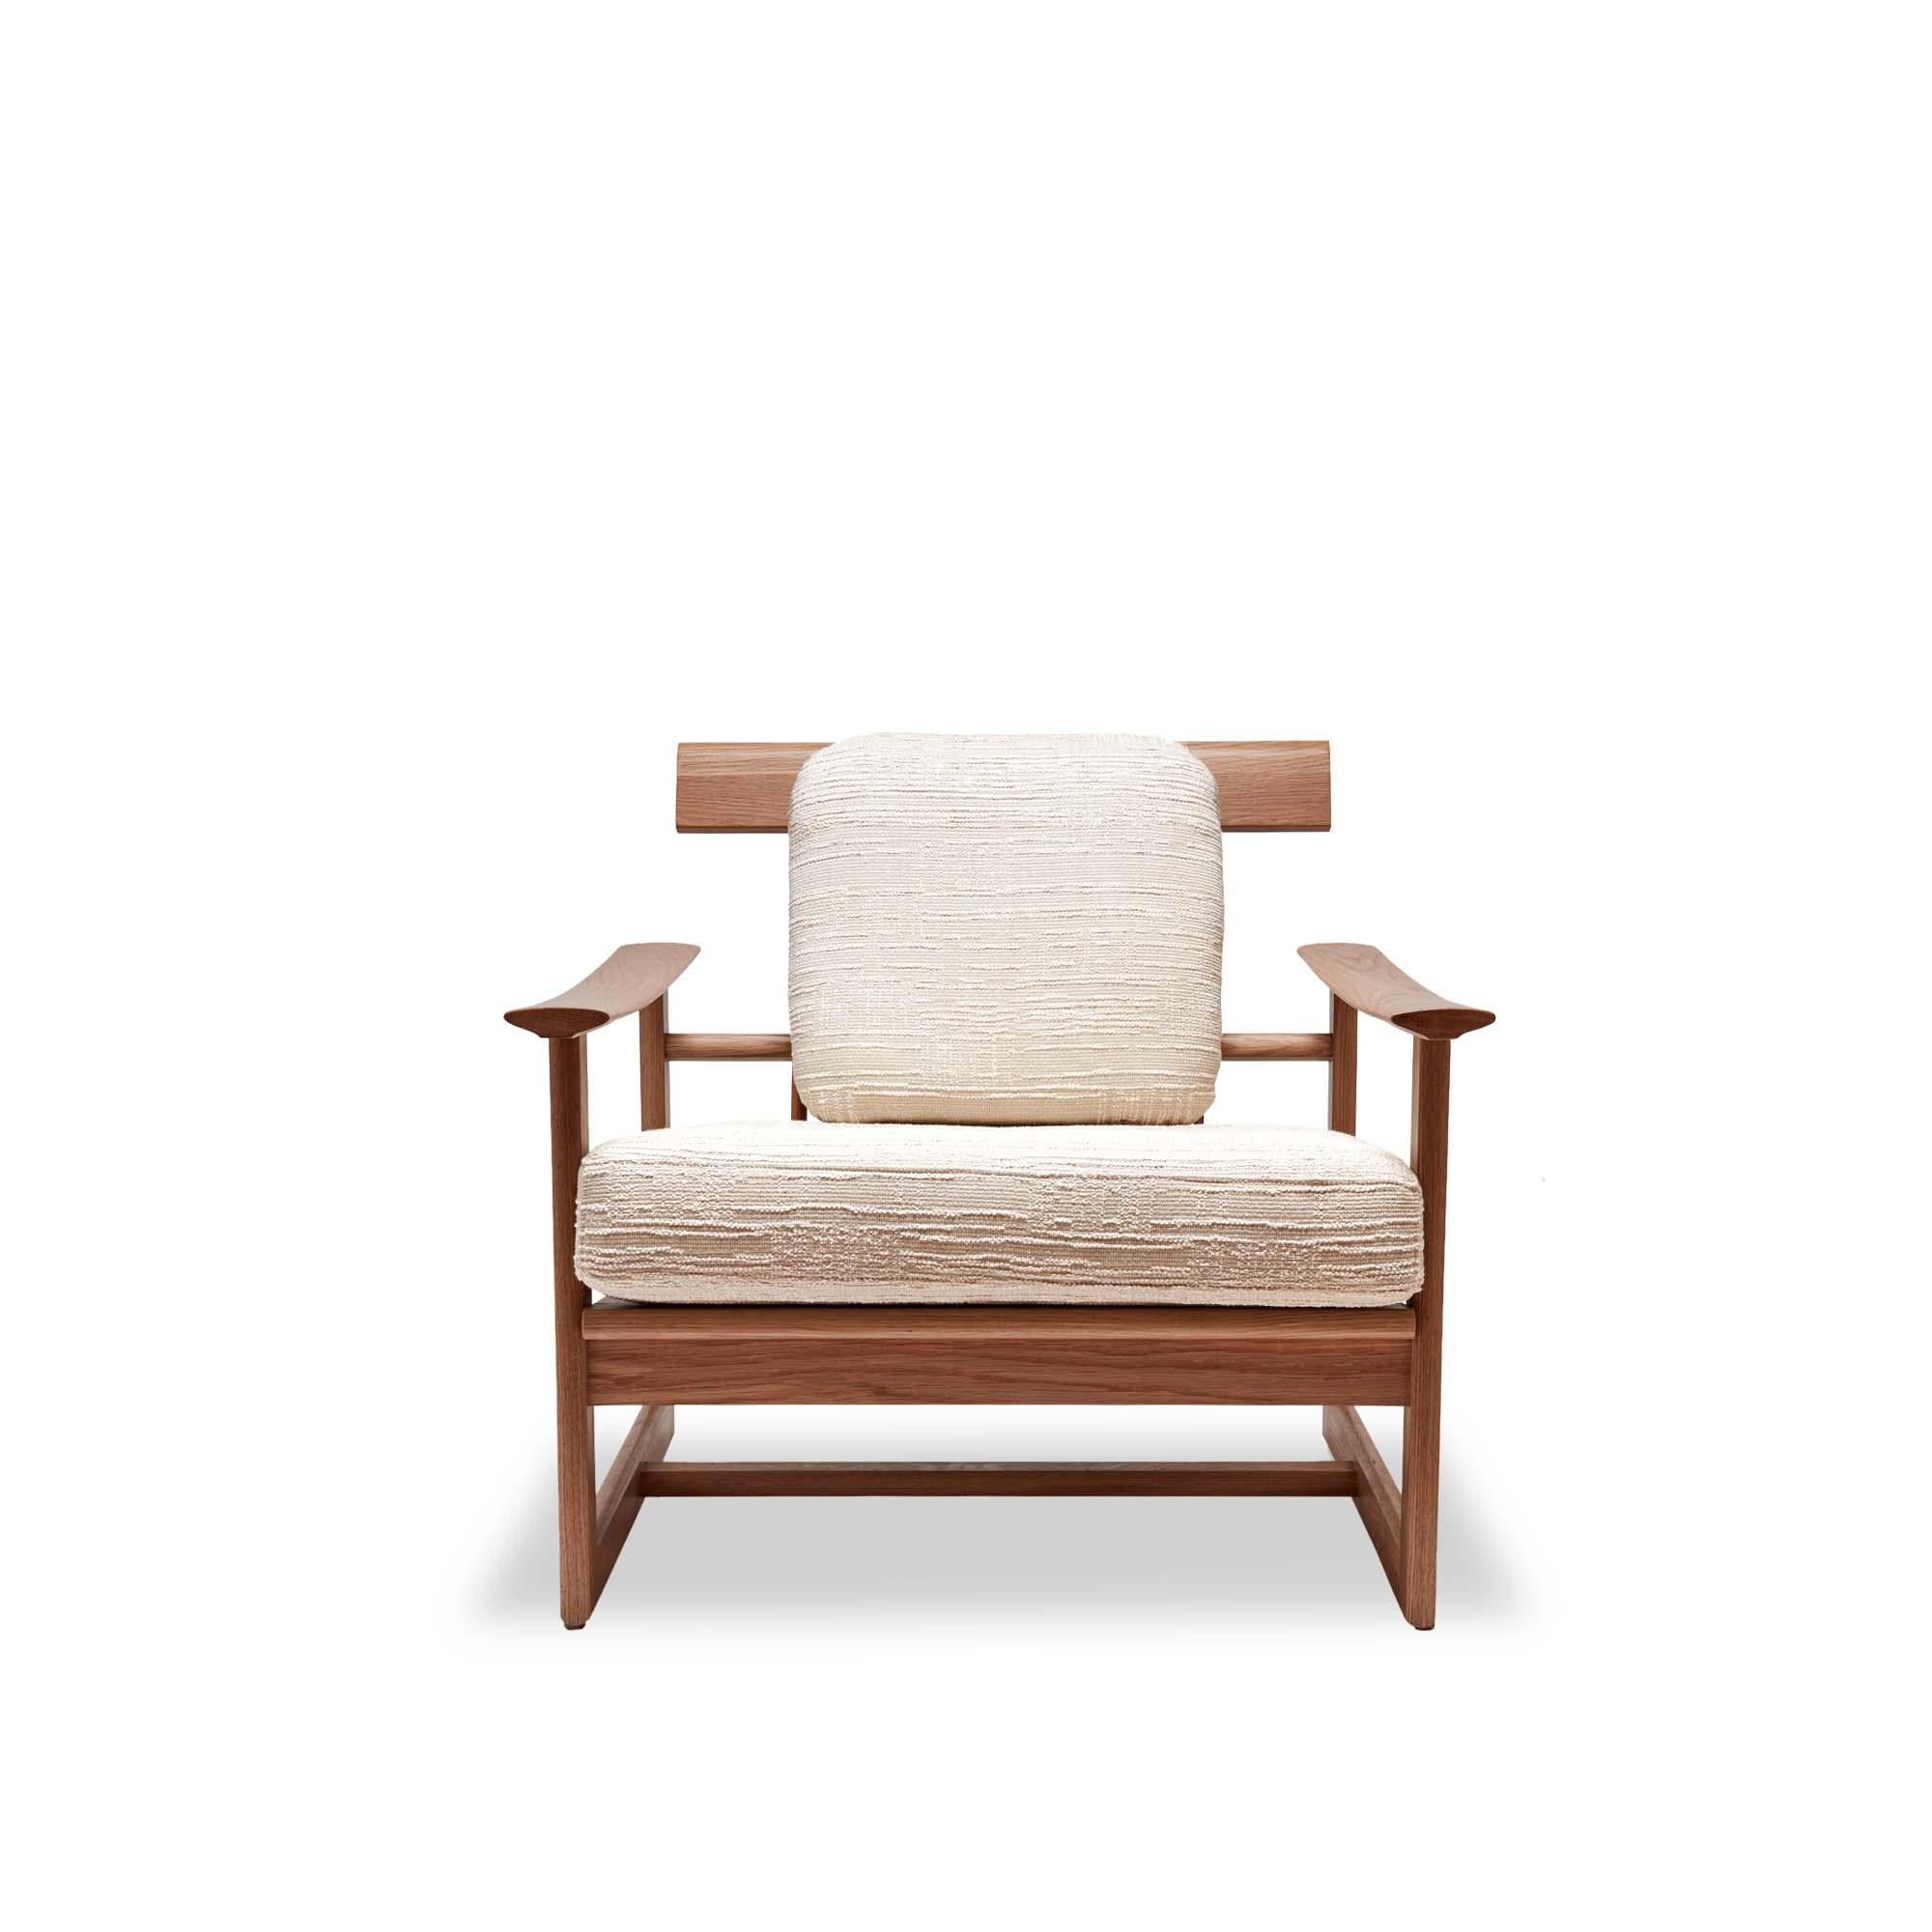 The Inverness chair is a Japanese-inspired spindle chair made of solid oak or walnut. Cushion available in rounded or square.

The Lawson-Fenning Collection is designed and handmade in Los Angeles, California.